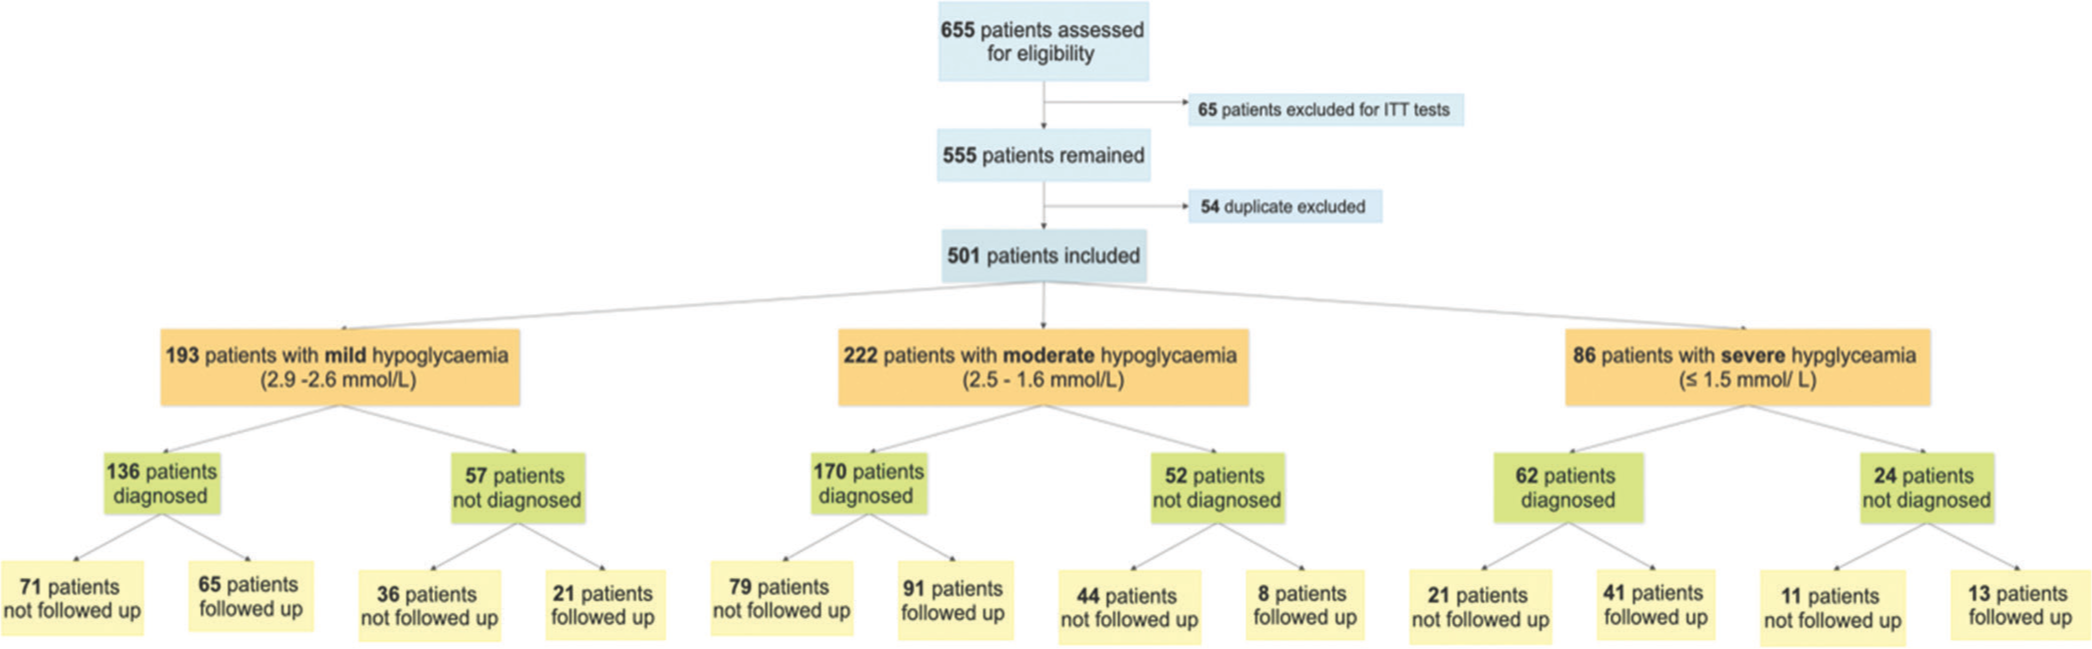 Etiology and outcome of hypoglycemia in young children: A retrospective cohort study